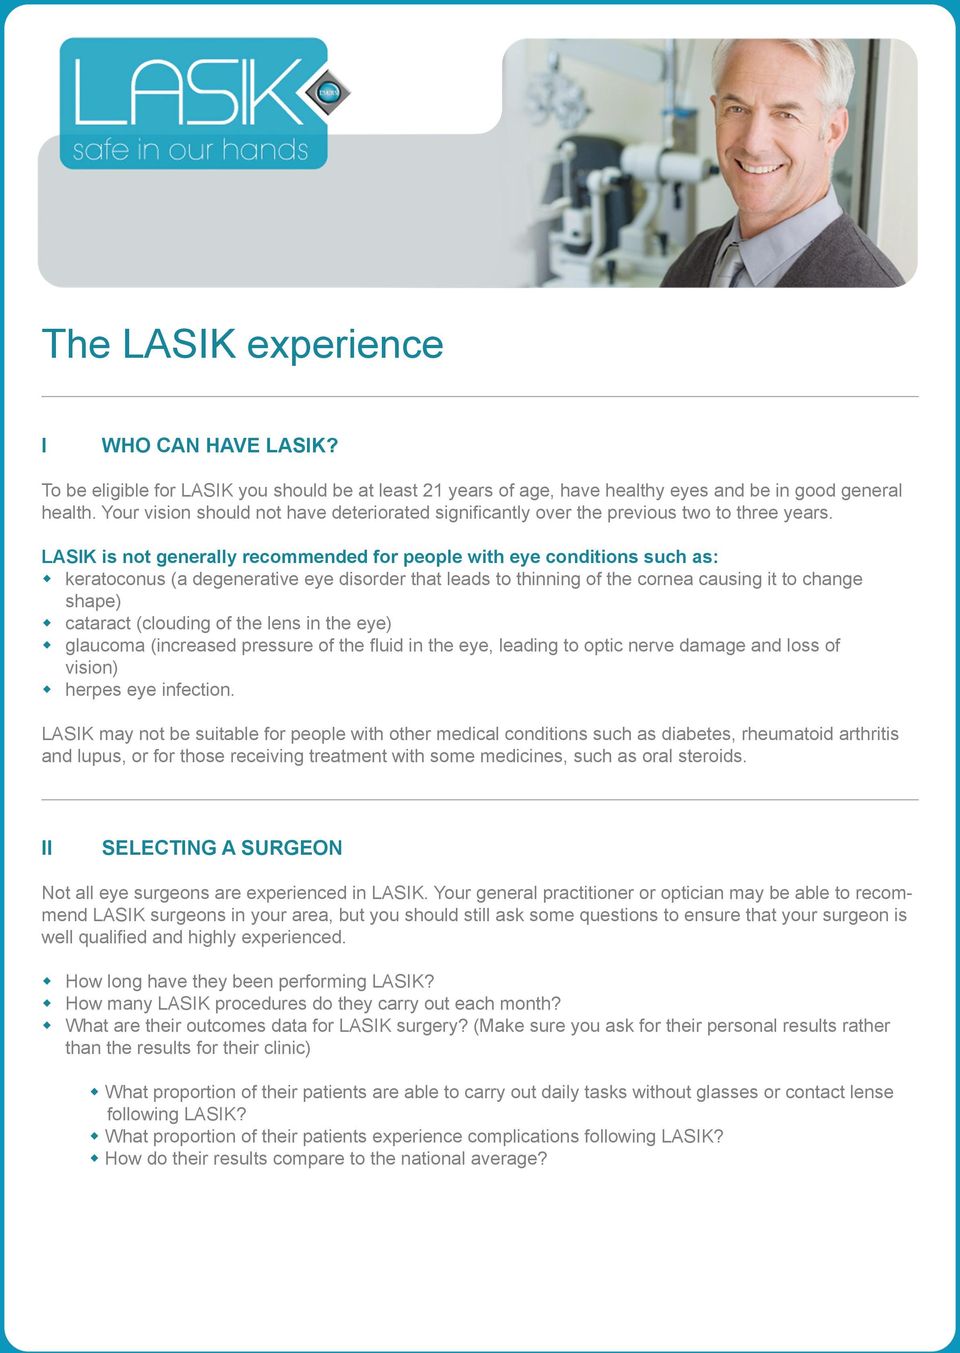 LASIK is not generally recommended for people with eye conditions such as: keratoconus (a degenerative eye disorder that leads to thinning of the cornea causing it to change shape) cataract (clouding